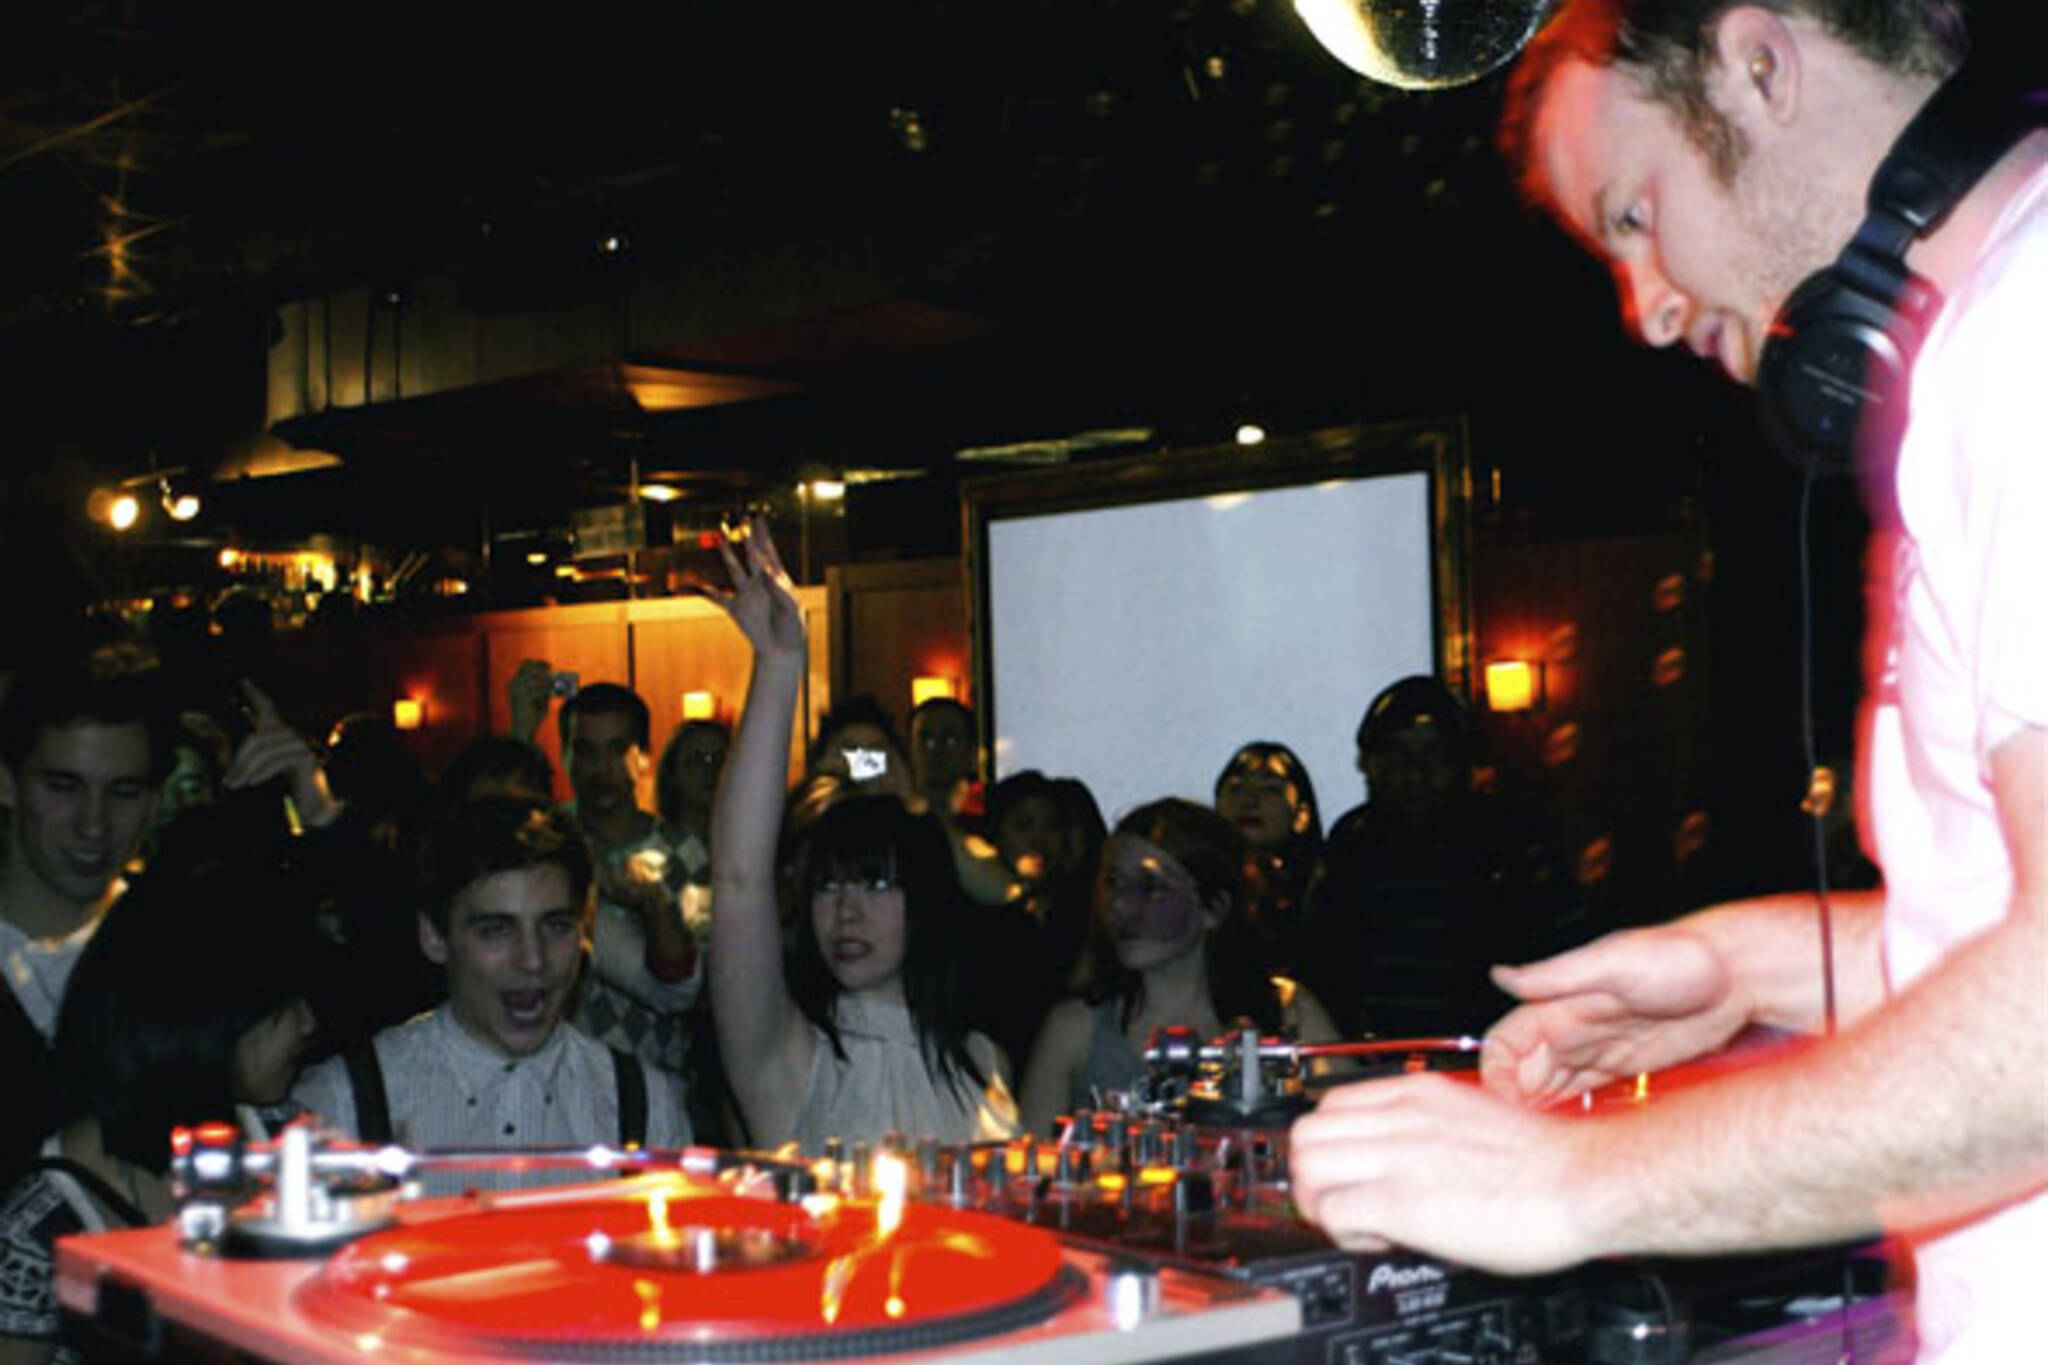 DJ Skratch Bastid at The Drake in Toronto during What's in the Box